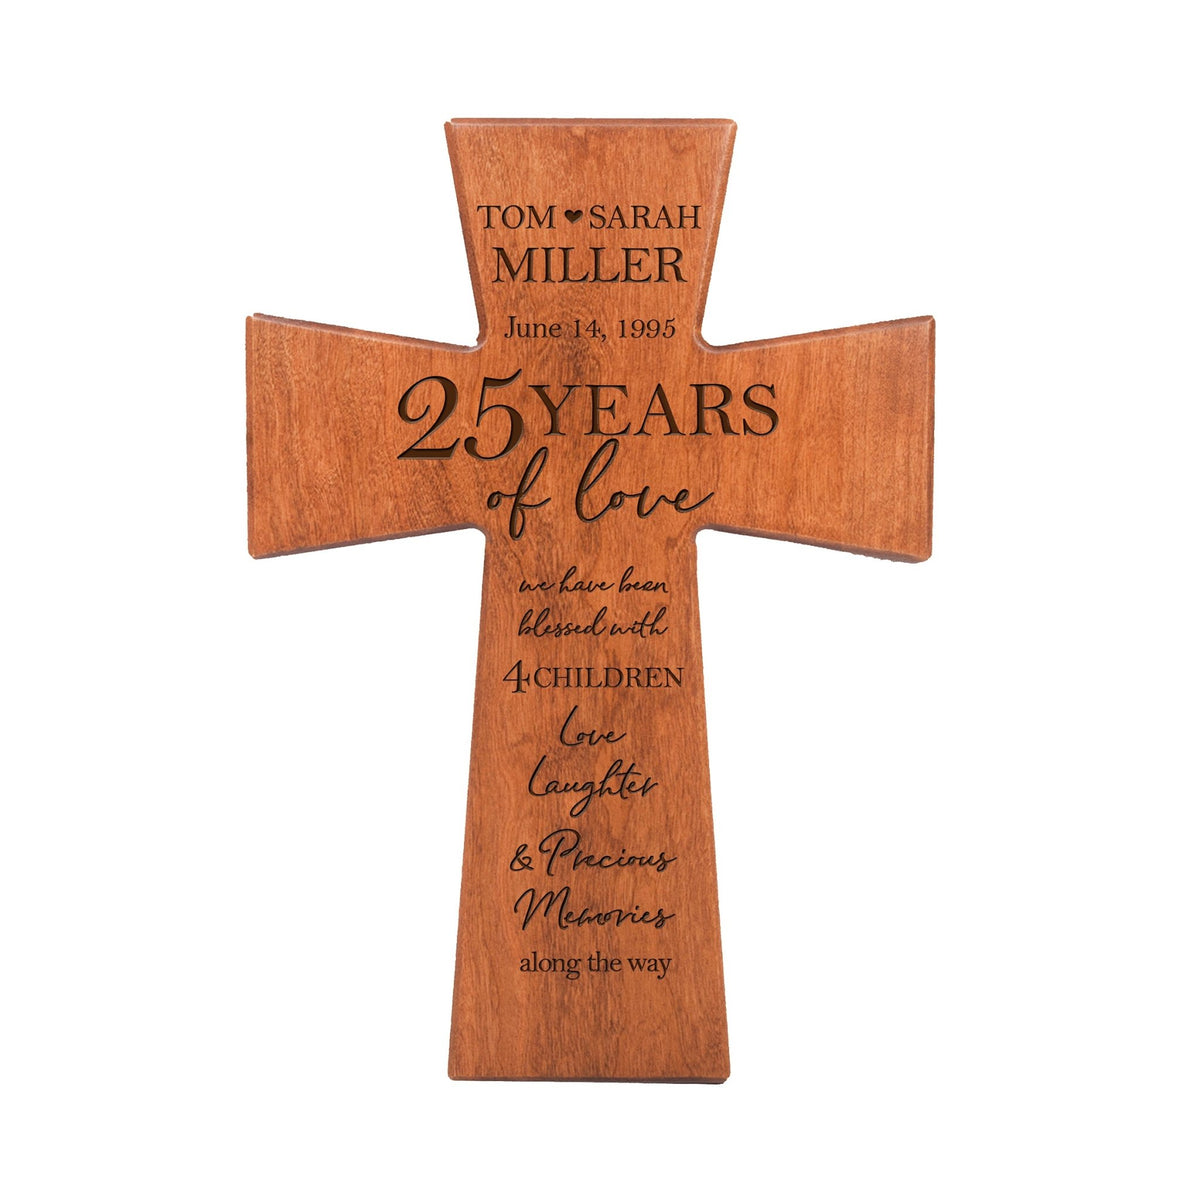 Unique Gifts for Couples - Customized Wall Cross for 25th Wedding Anniversary